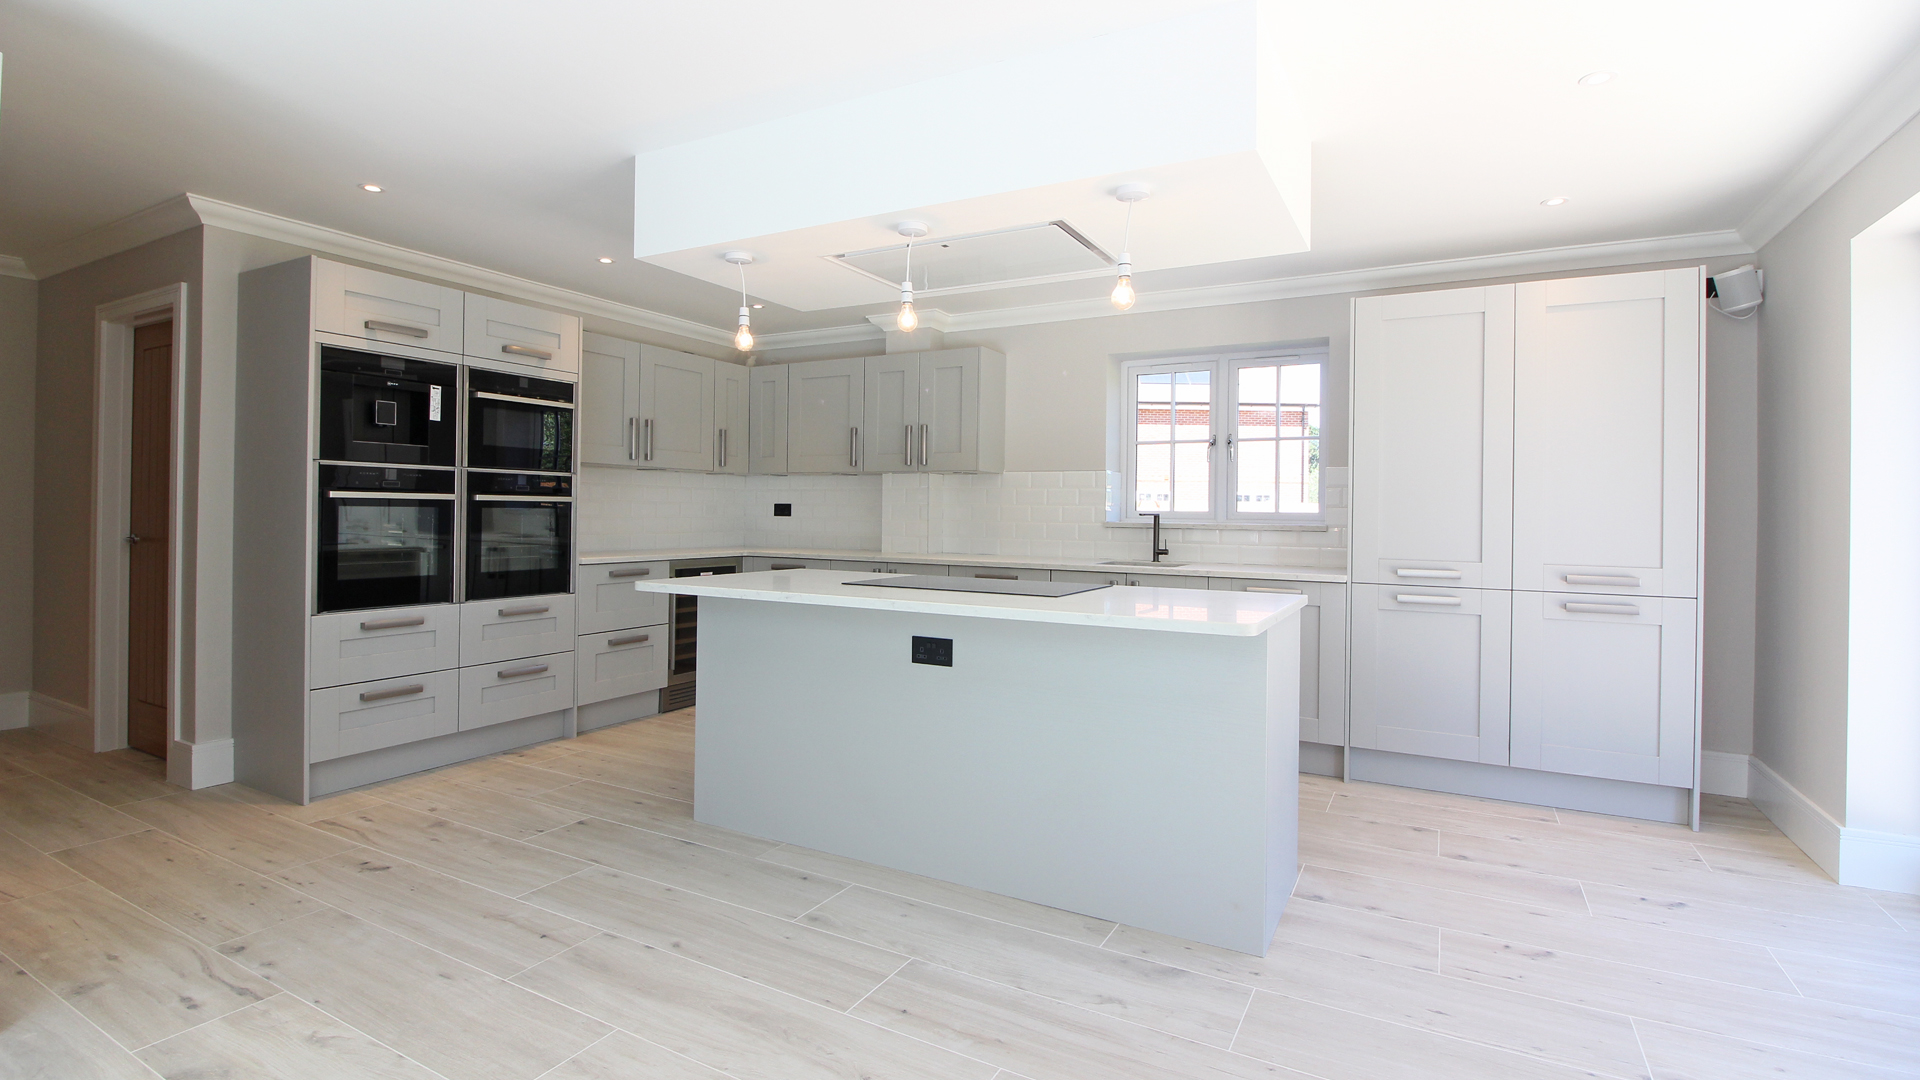 Fitted kitchen at our Weavers park development